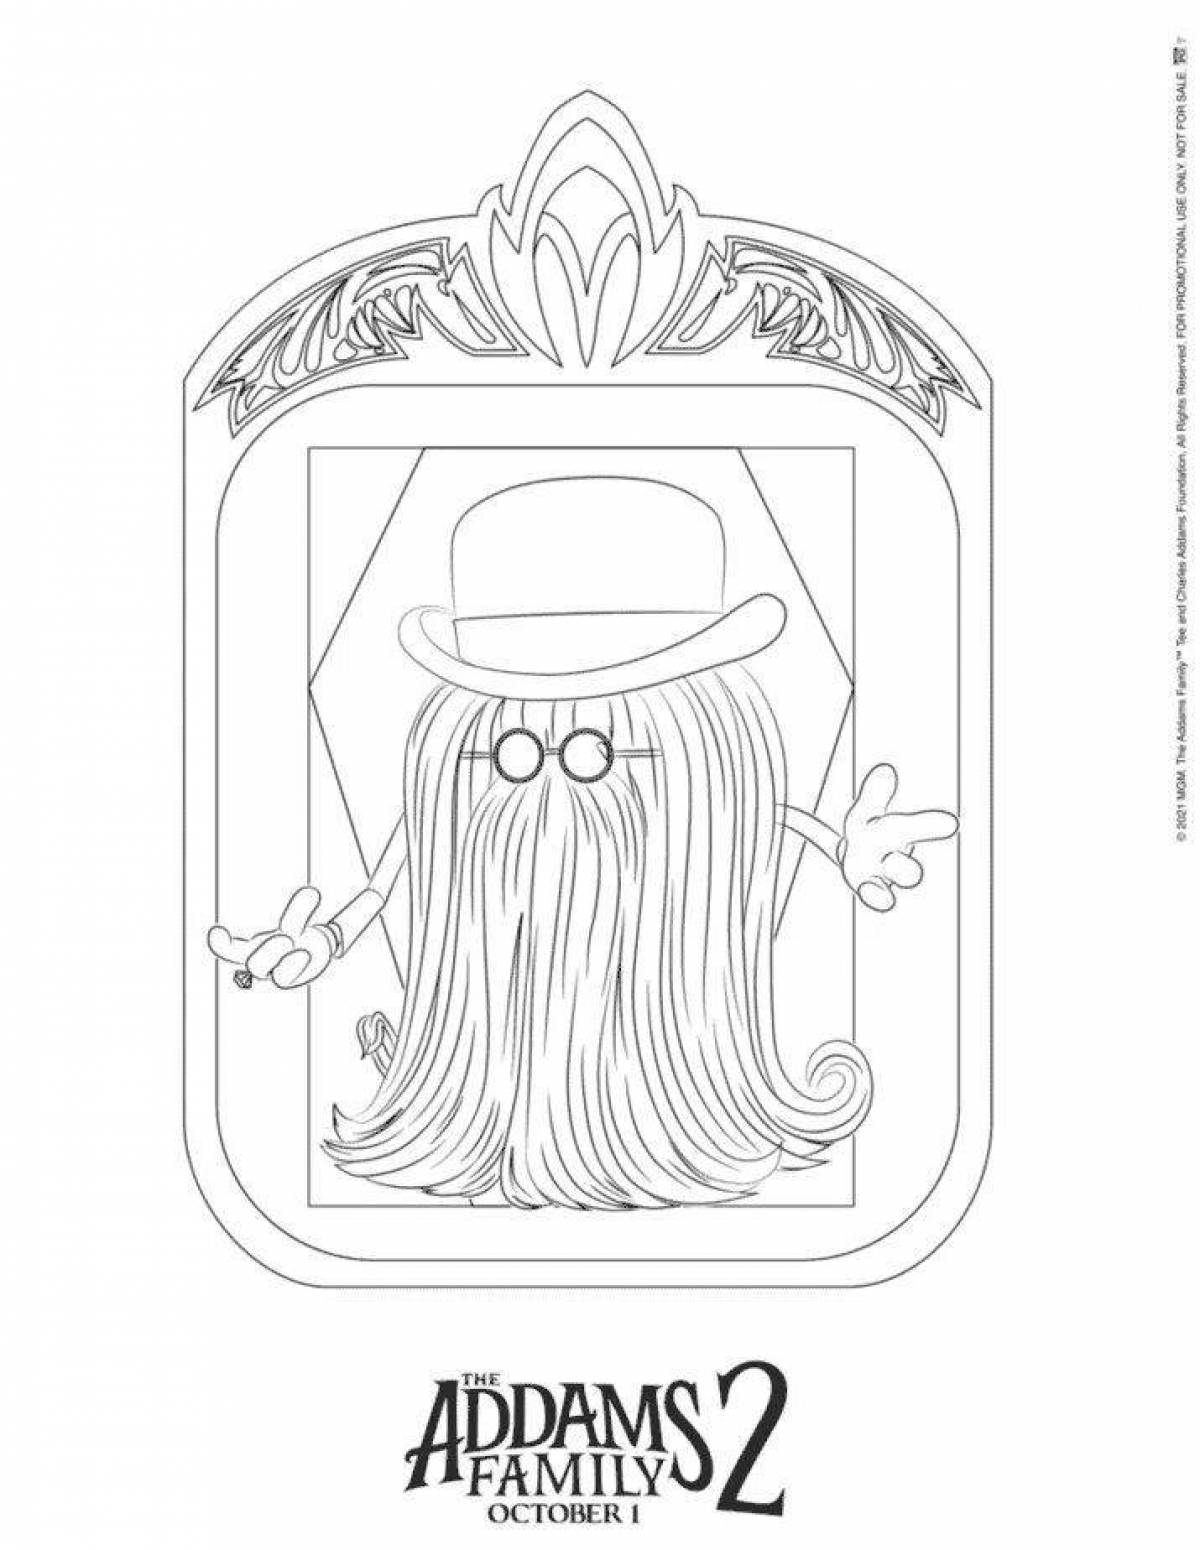 Witty addams family coloring book